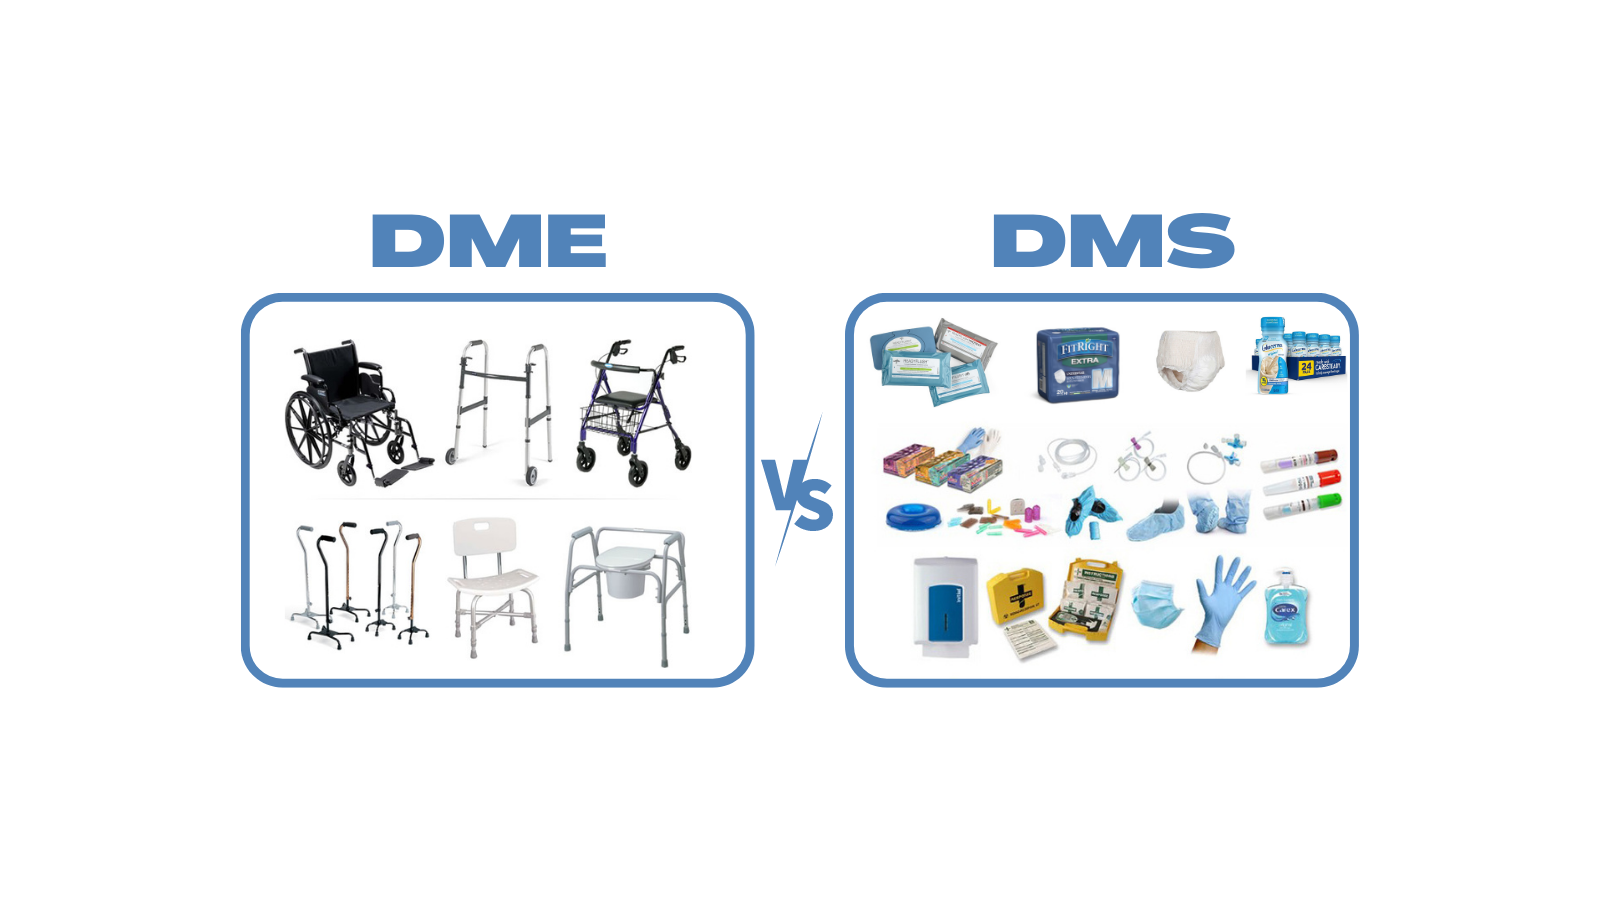 What DME Means in Medical Terms: Durable Medical Equipment